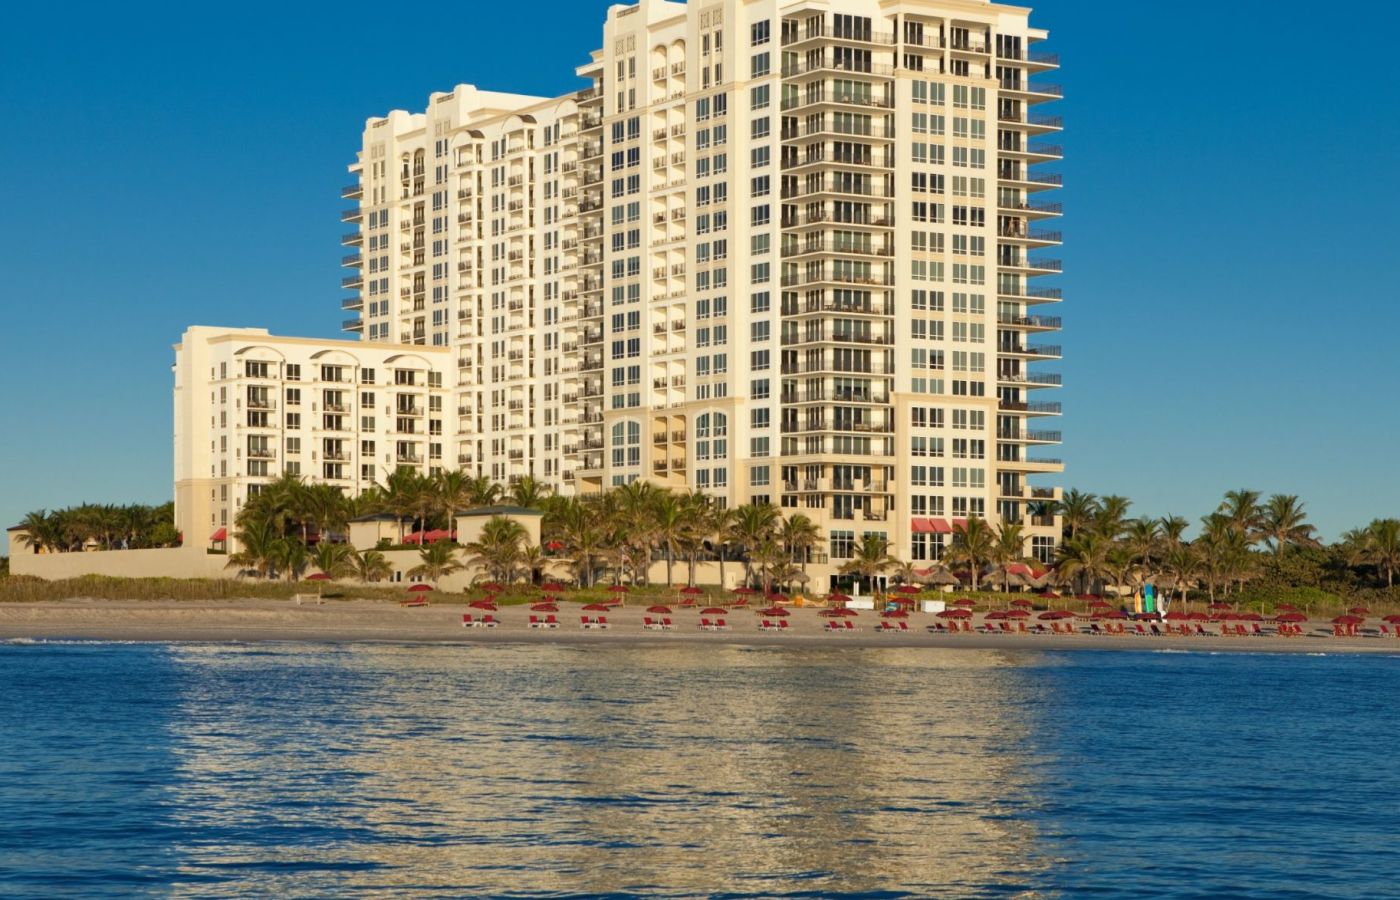 A Large White Building Next To A Body Of Water